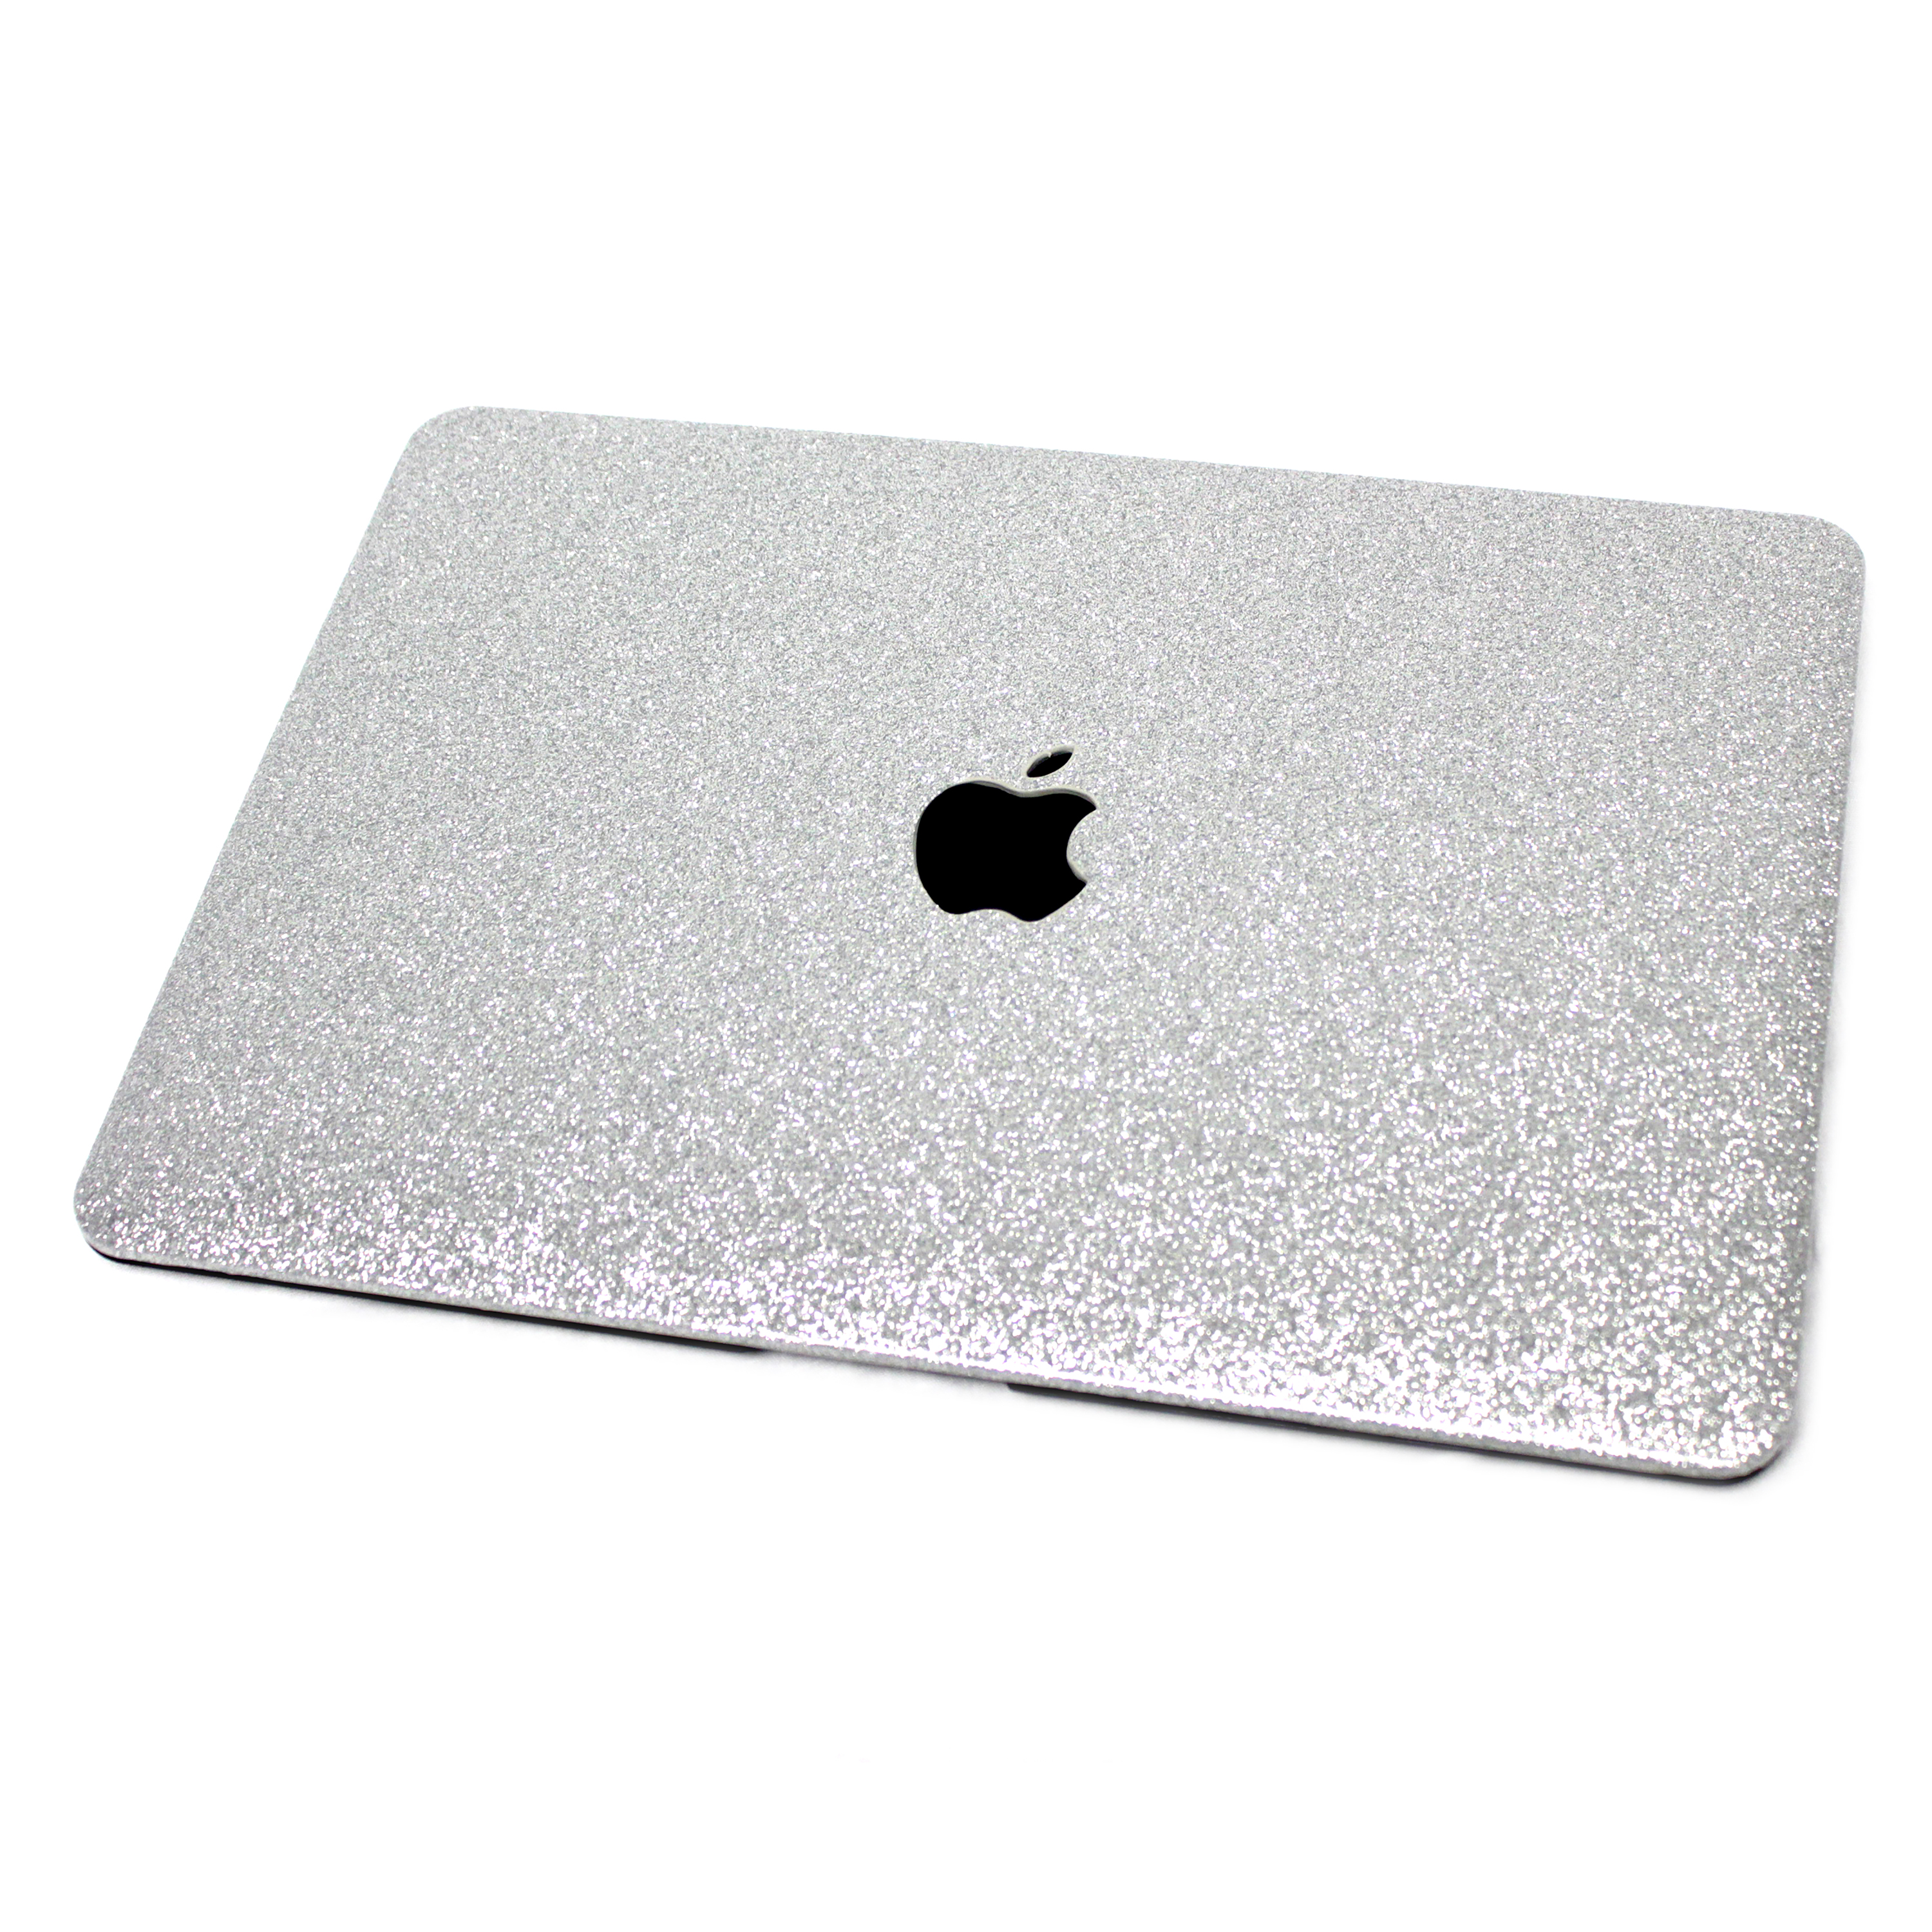 Non Retina 12 Gold MacBook Pro 13 inch Case ACOLOR Soft-Touch Frosted Plastic Hard Shell Case Cover for Old Version MacBook Pro 13 with CD-ROM Model A1278 